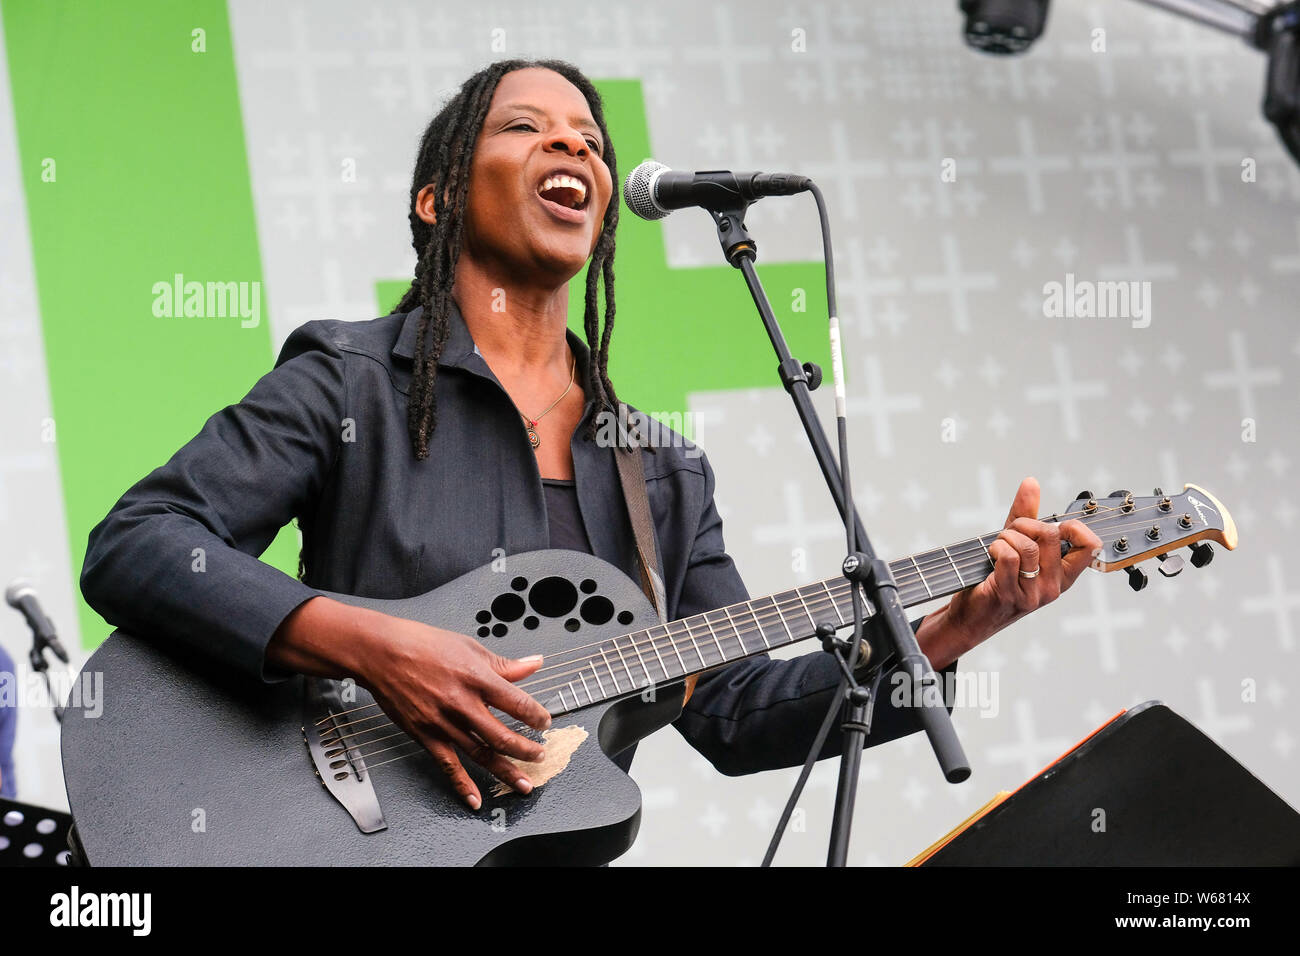 Concert of the Caribbean christian reaggae, rock and pop singer JUDY BAILEY at the German Protestant Church Congress 2019 in Dortmund/Germany. Judy Bailey lives in Germany. Stock Photo